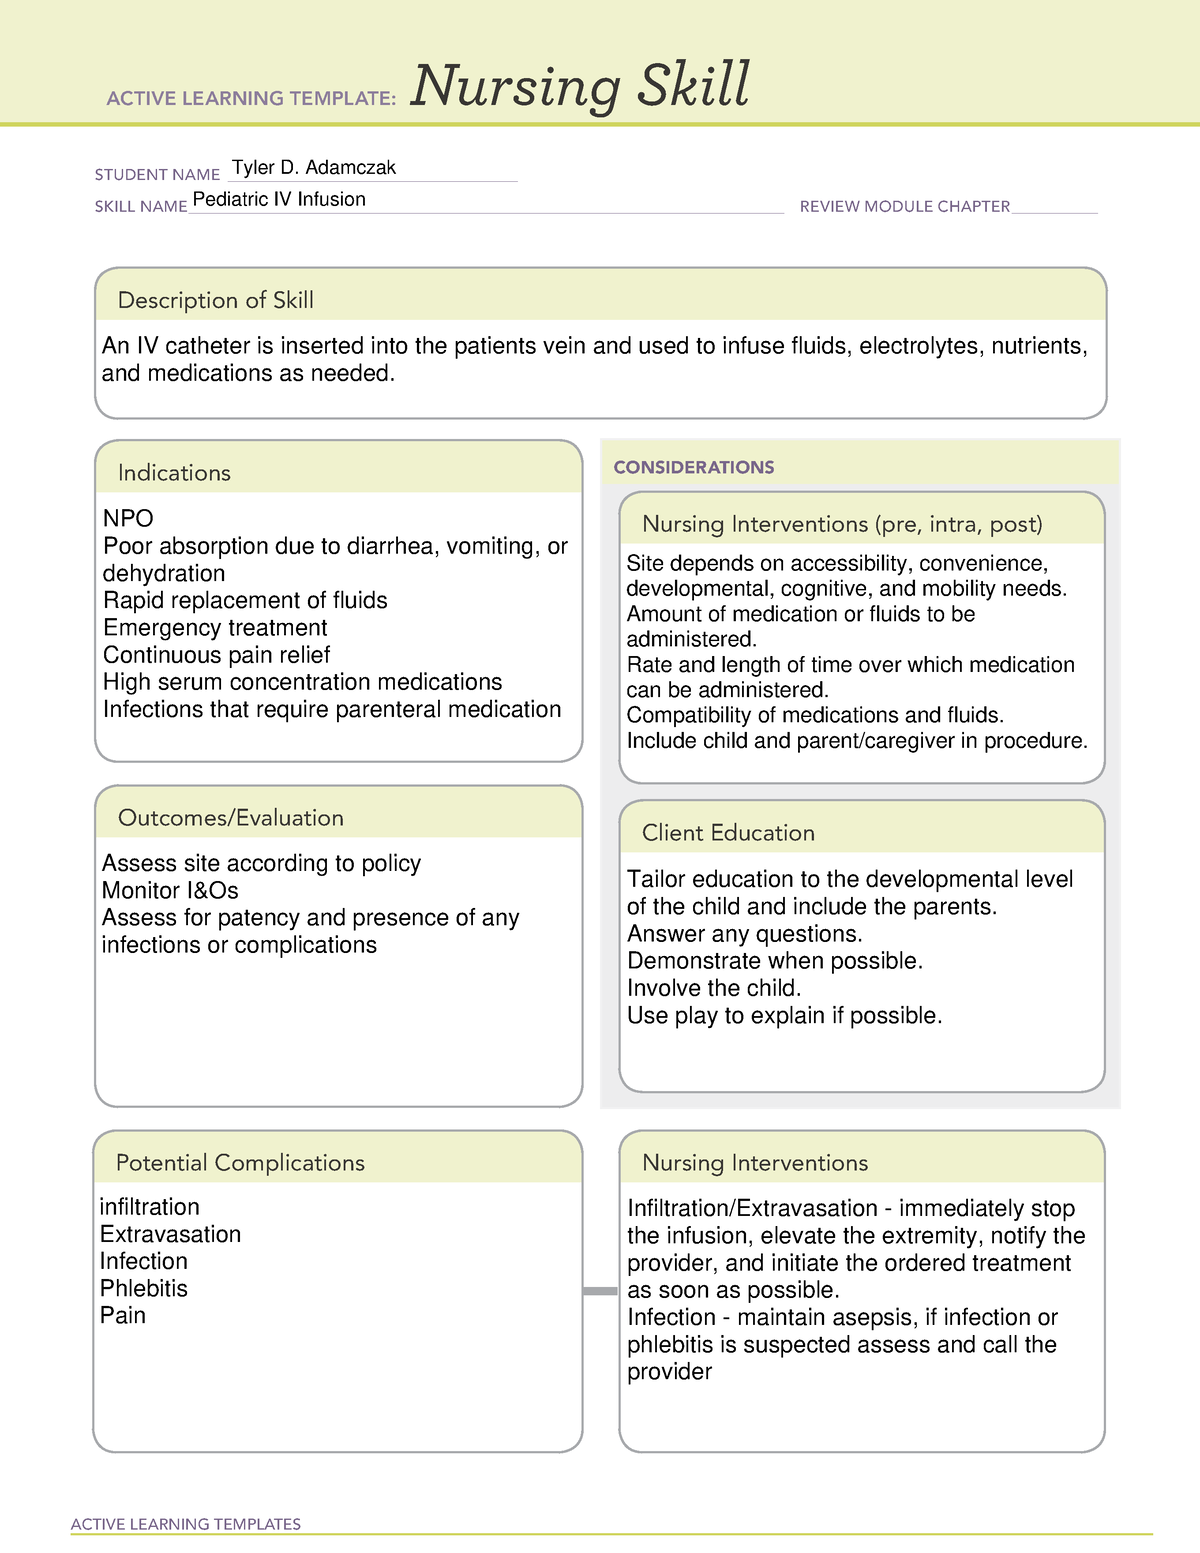 pediatric-iv-infusion-nursing-skill-template-active-learning